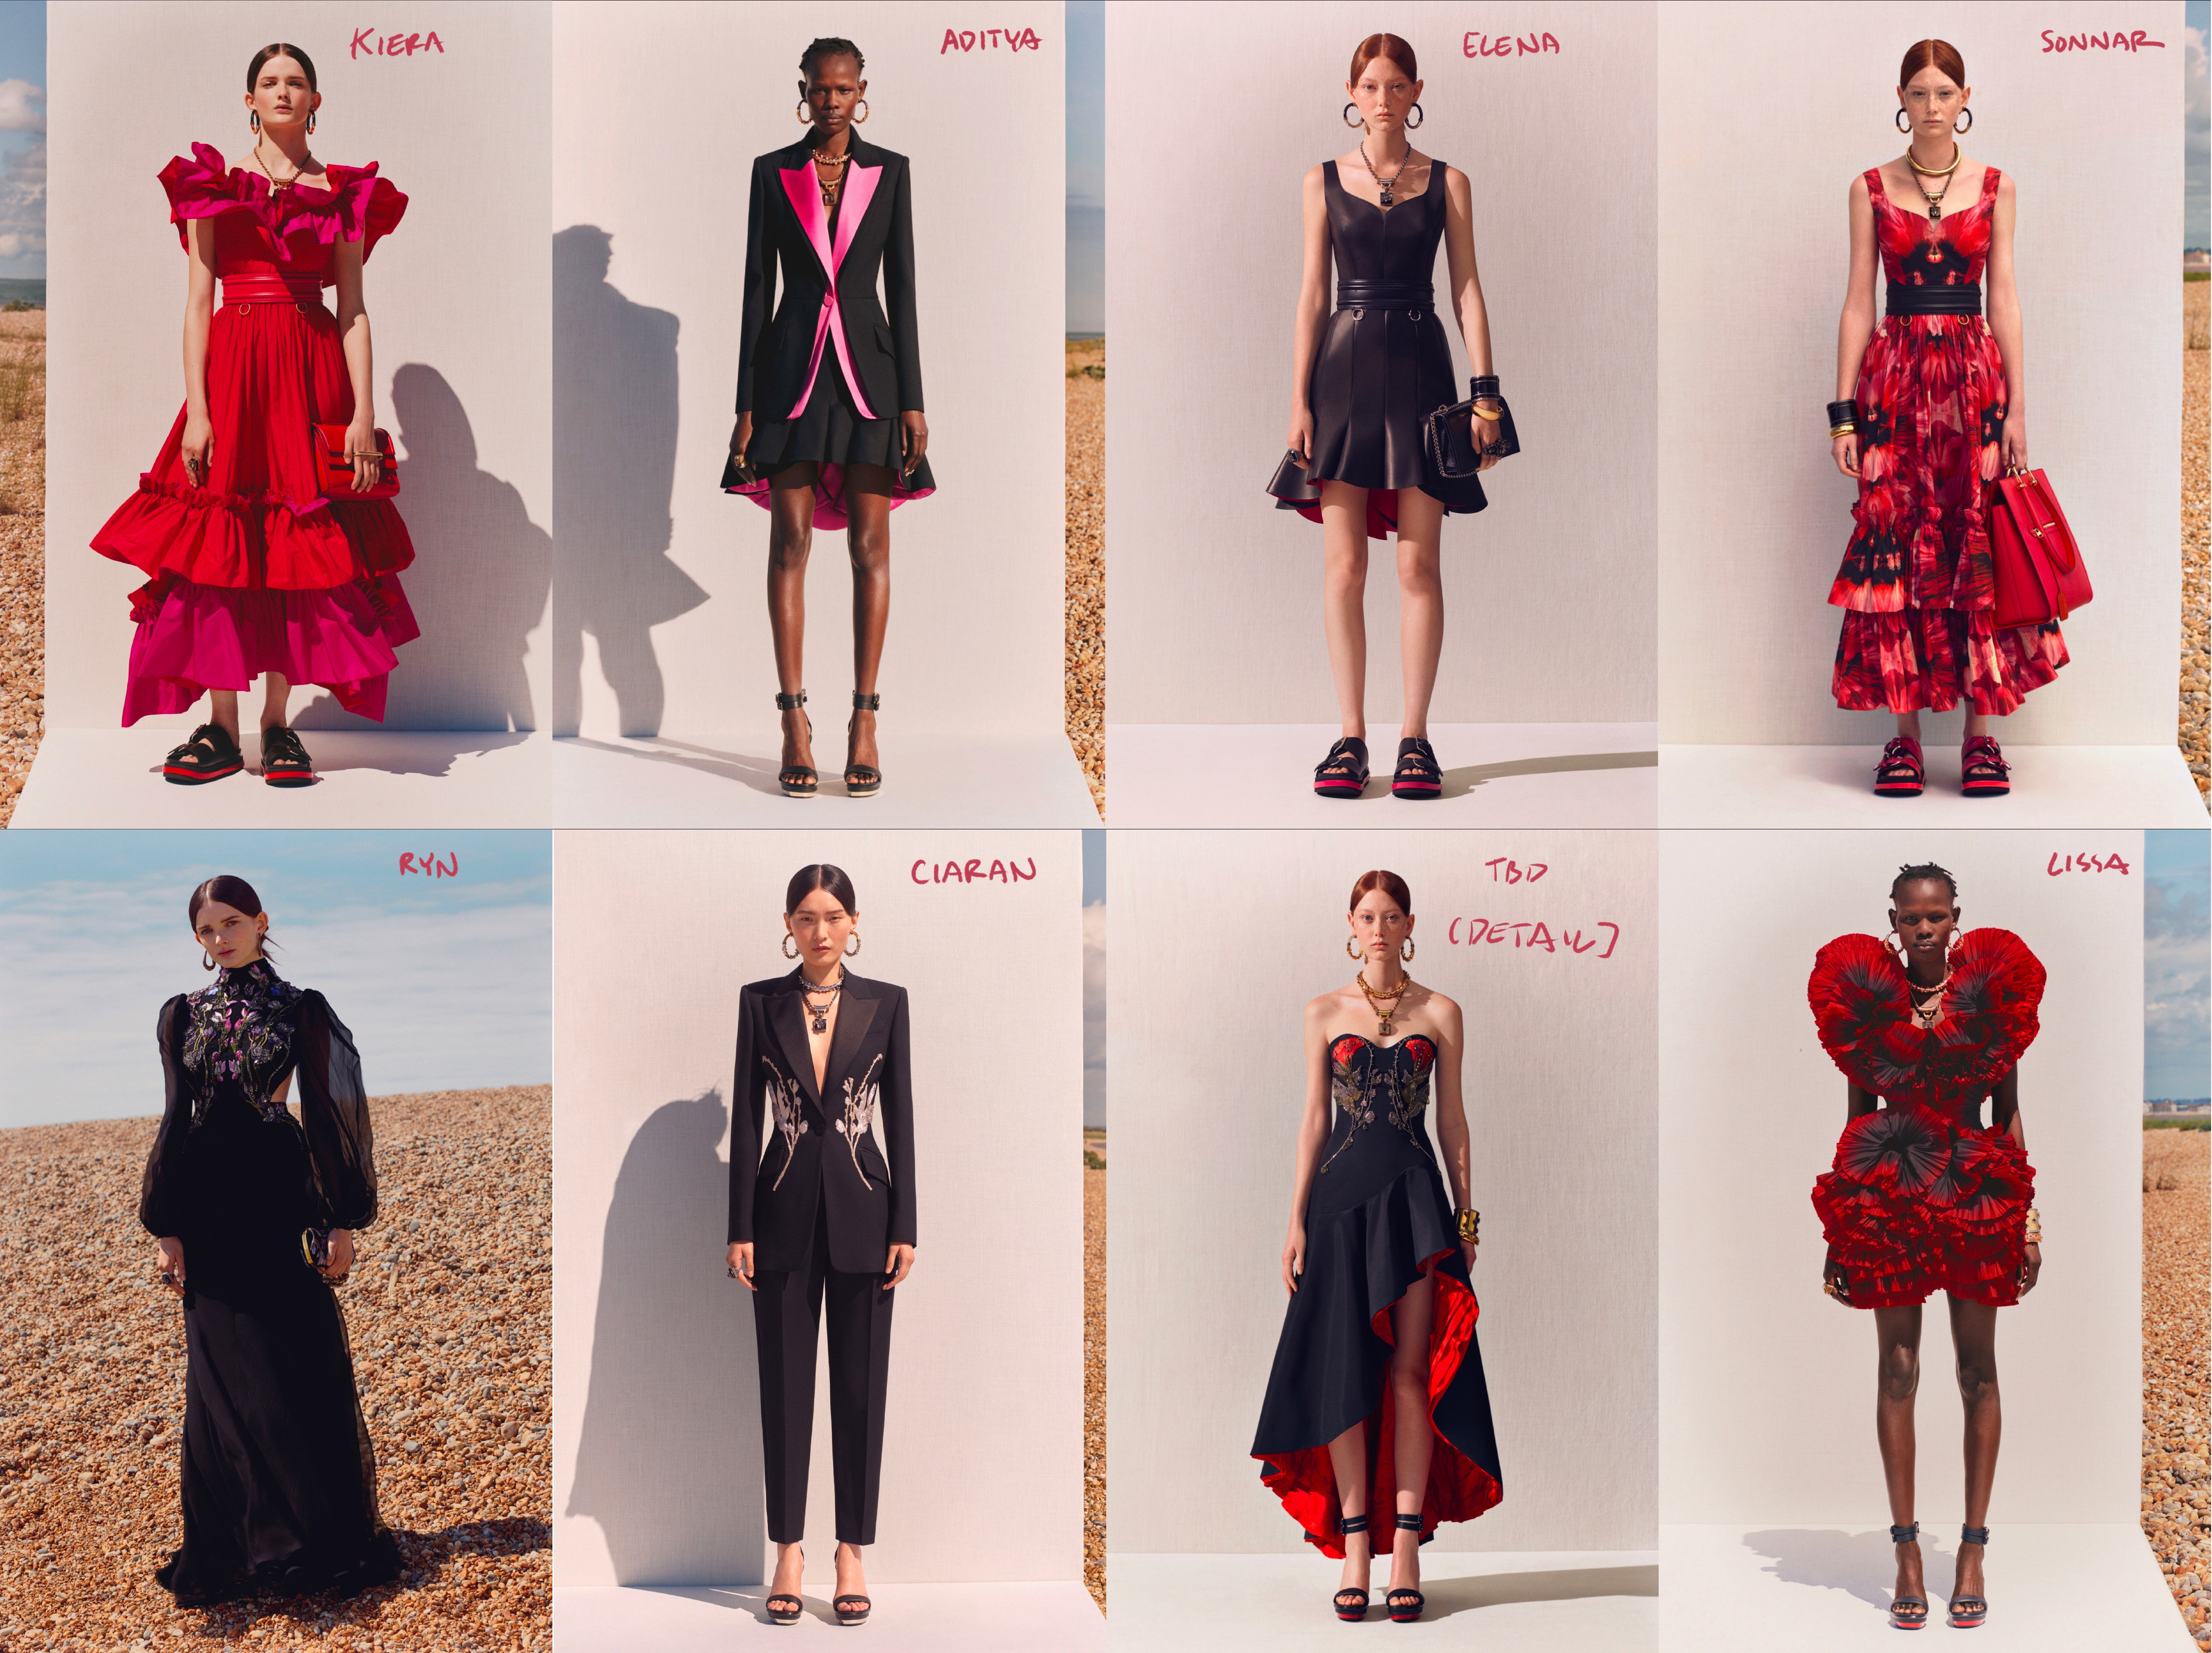 Here are the reference images for the clothing. All are from McQueen's Resort 2020 collection.